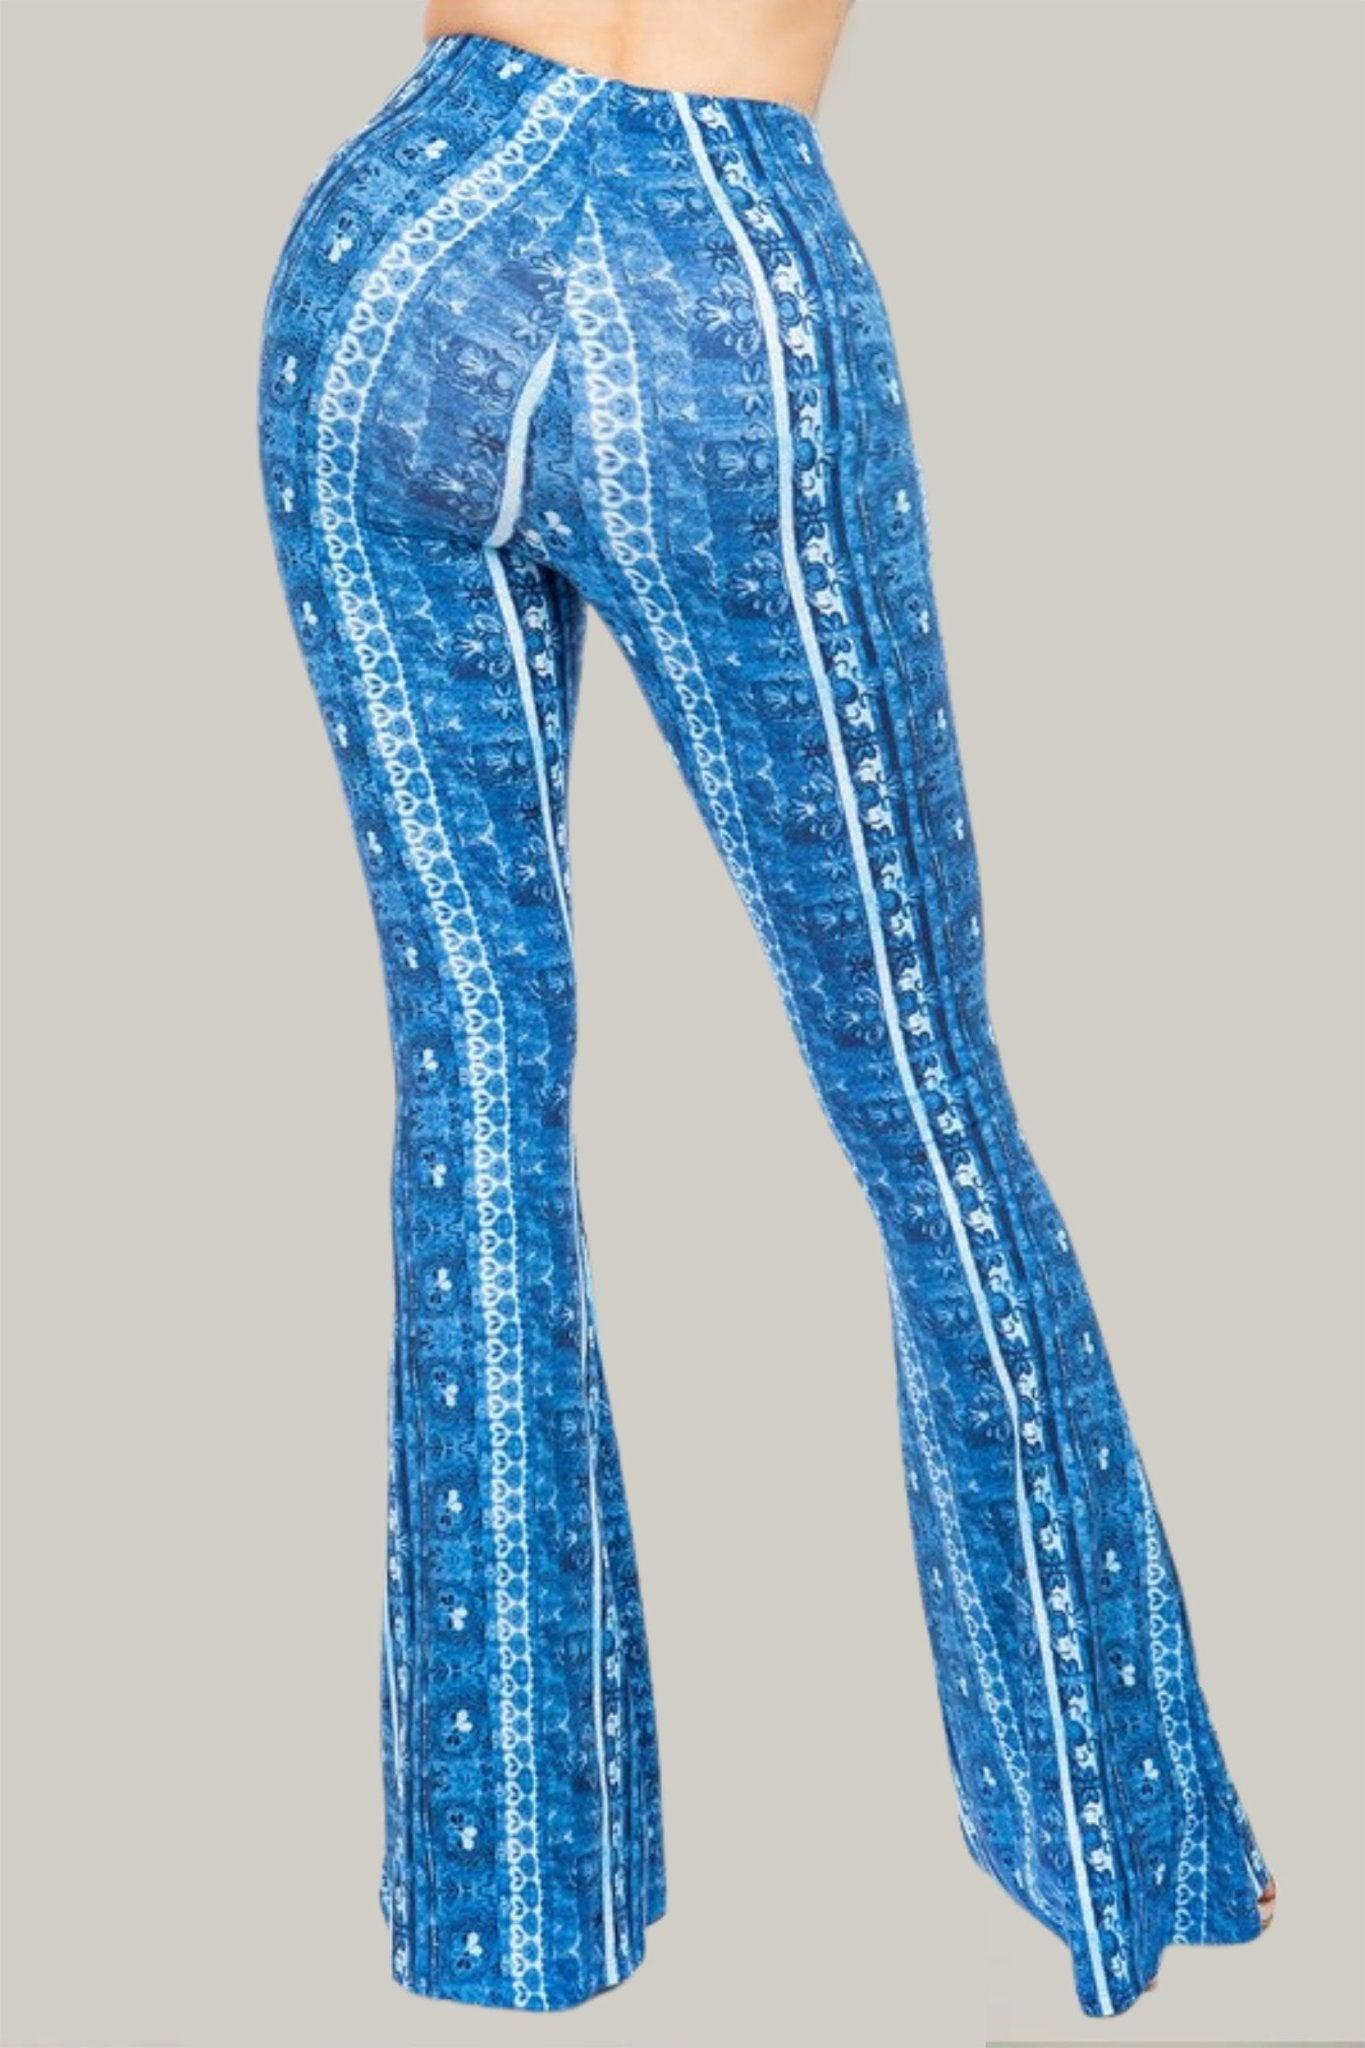 Boho Floral Printed Flared Pants - MY SEXY STYLES